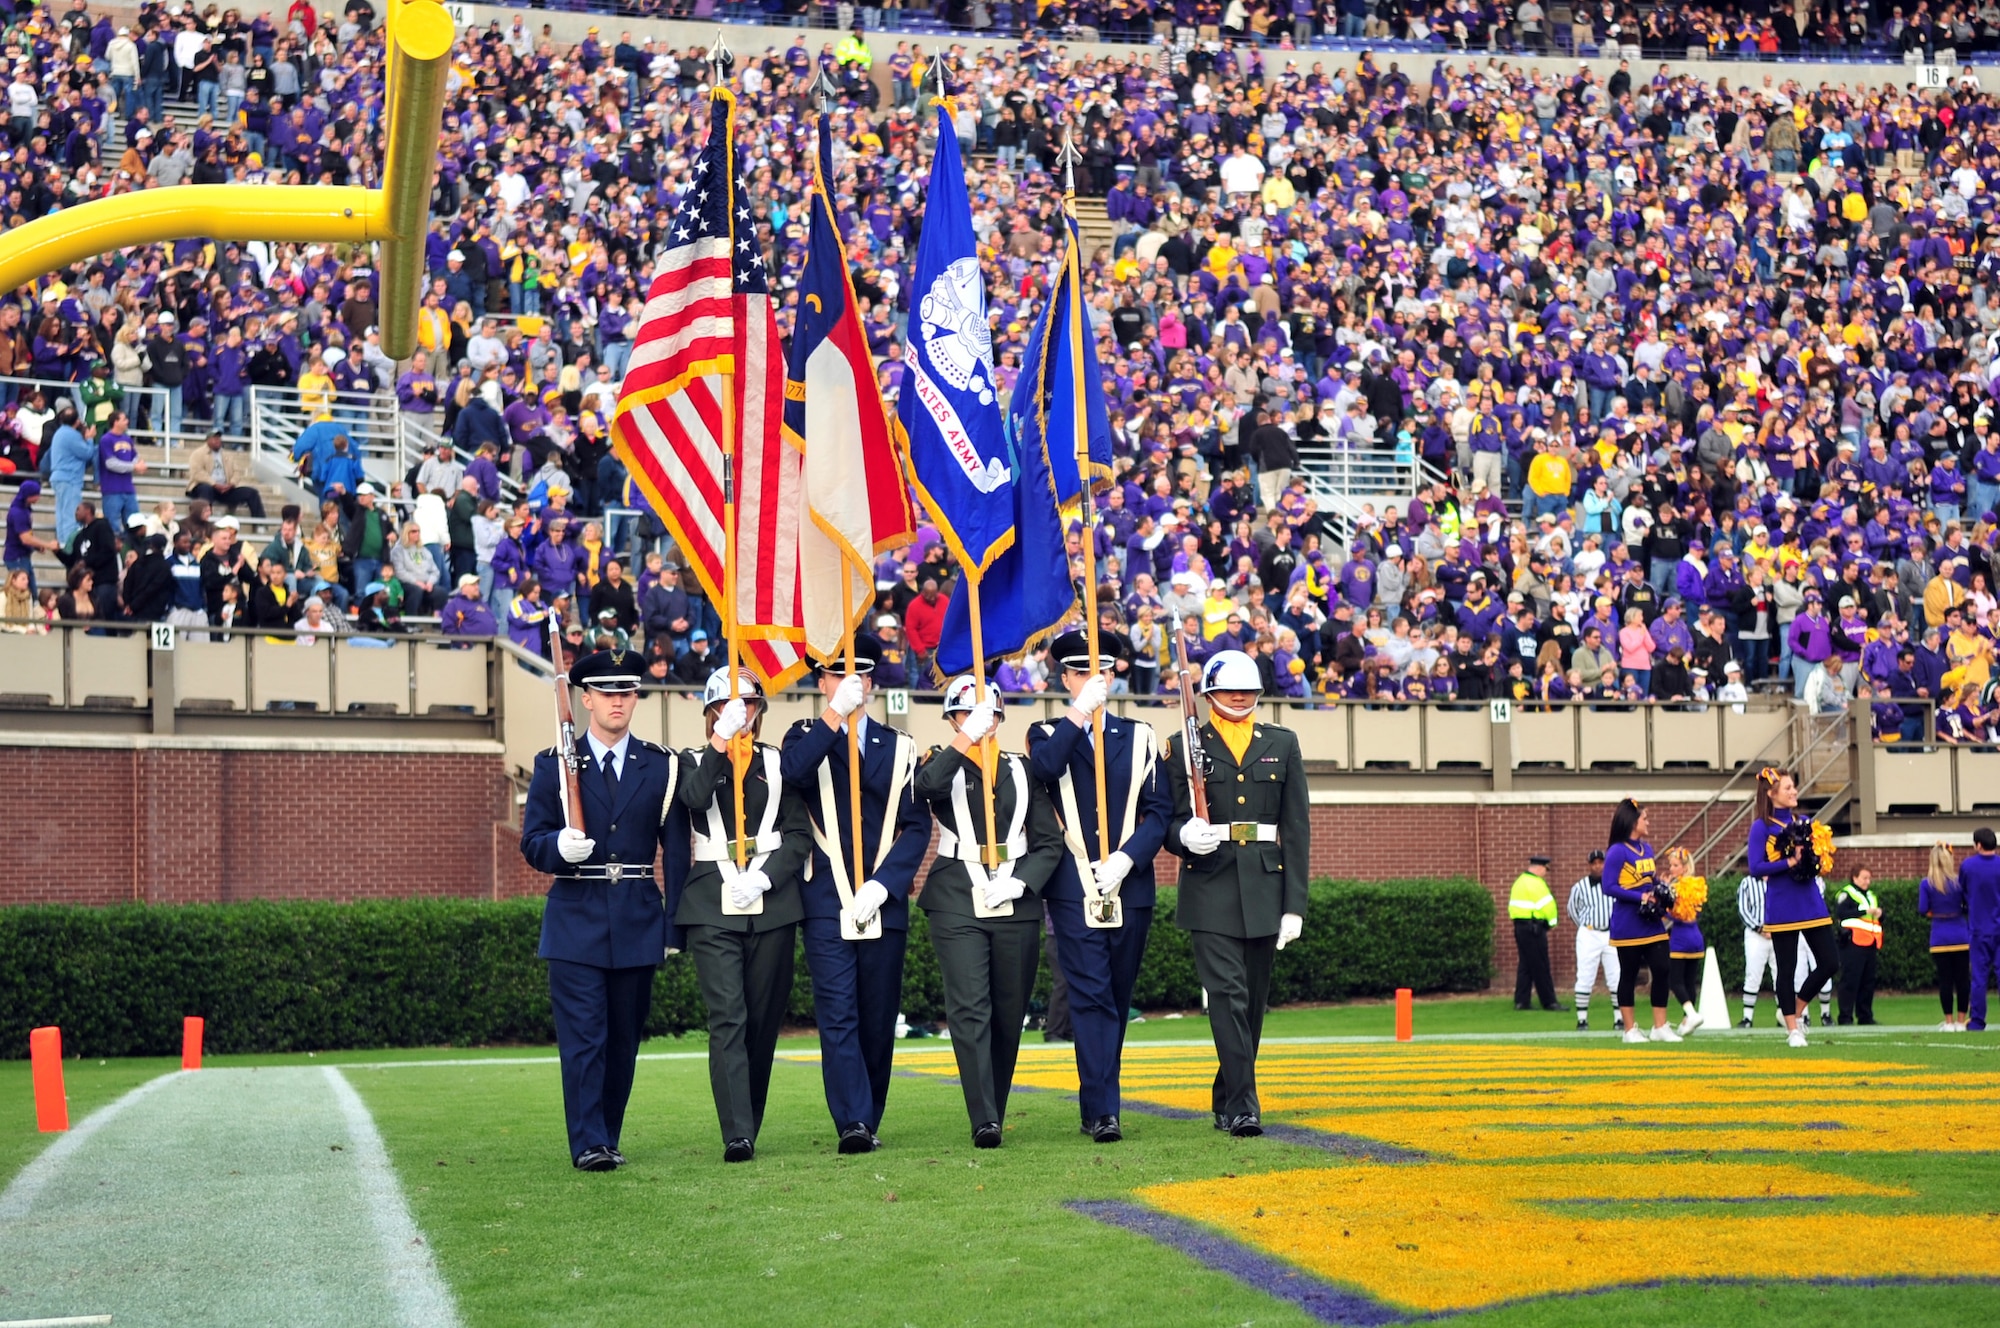 Members of the East Carolina University Air Force and Army Reserve Officer Training Corps present the colors during the Military Appreciation Day football game against University of Alabama at Birmingham in the ECU Dowdy-Ficklen Stadium, Greenville, N.C., Nov. 21, 2009. The college donated 300 tickets for the game to Airmen serving at Seymour Johnson Air Force Base, N.C. (U.S. Air Force photo/Airman 1st Class Rae Perry)